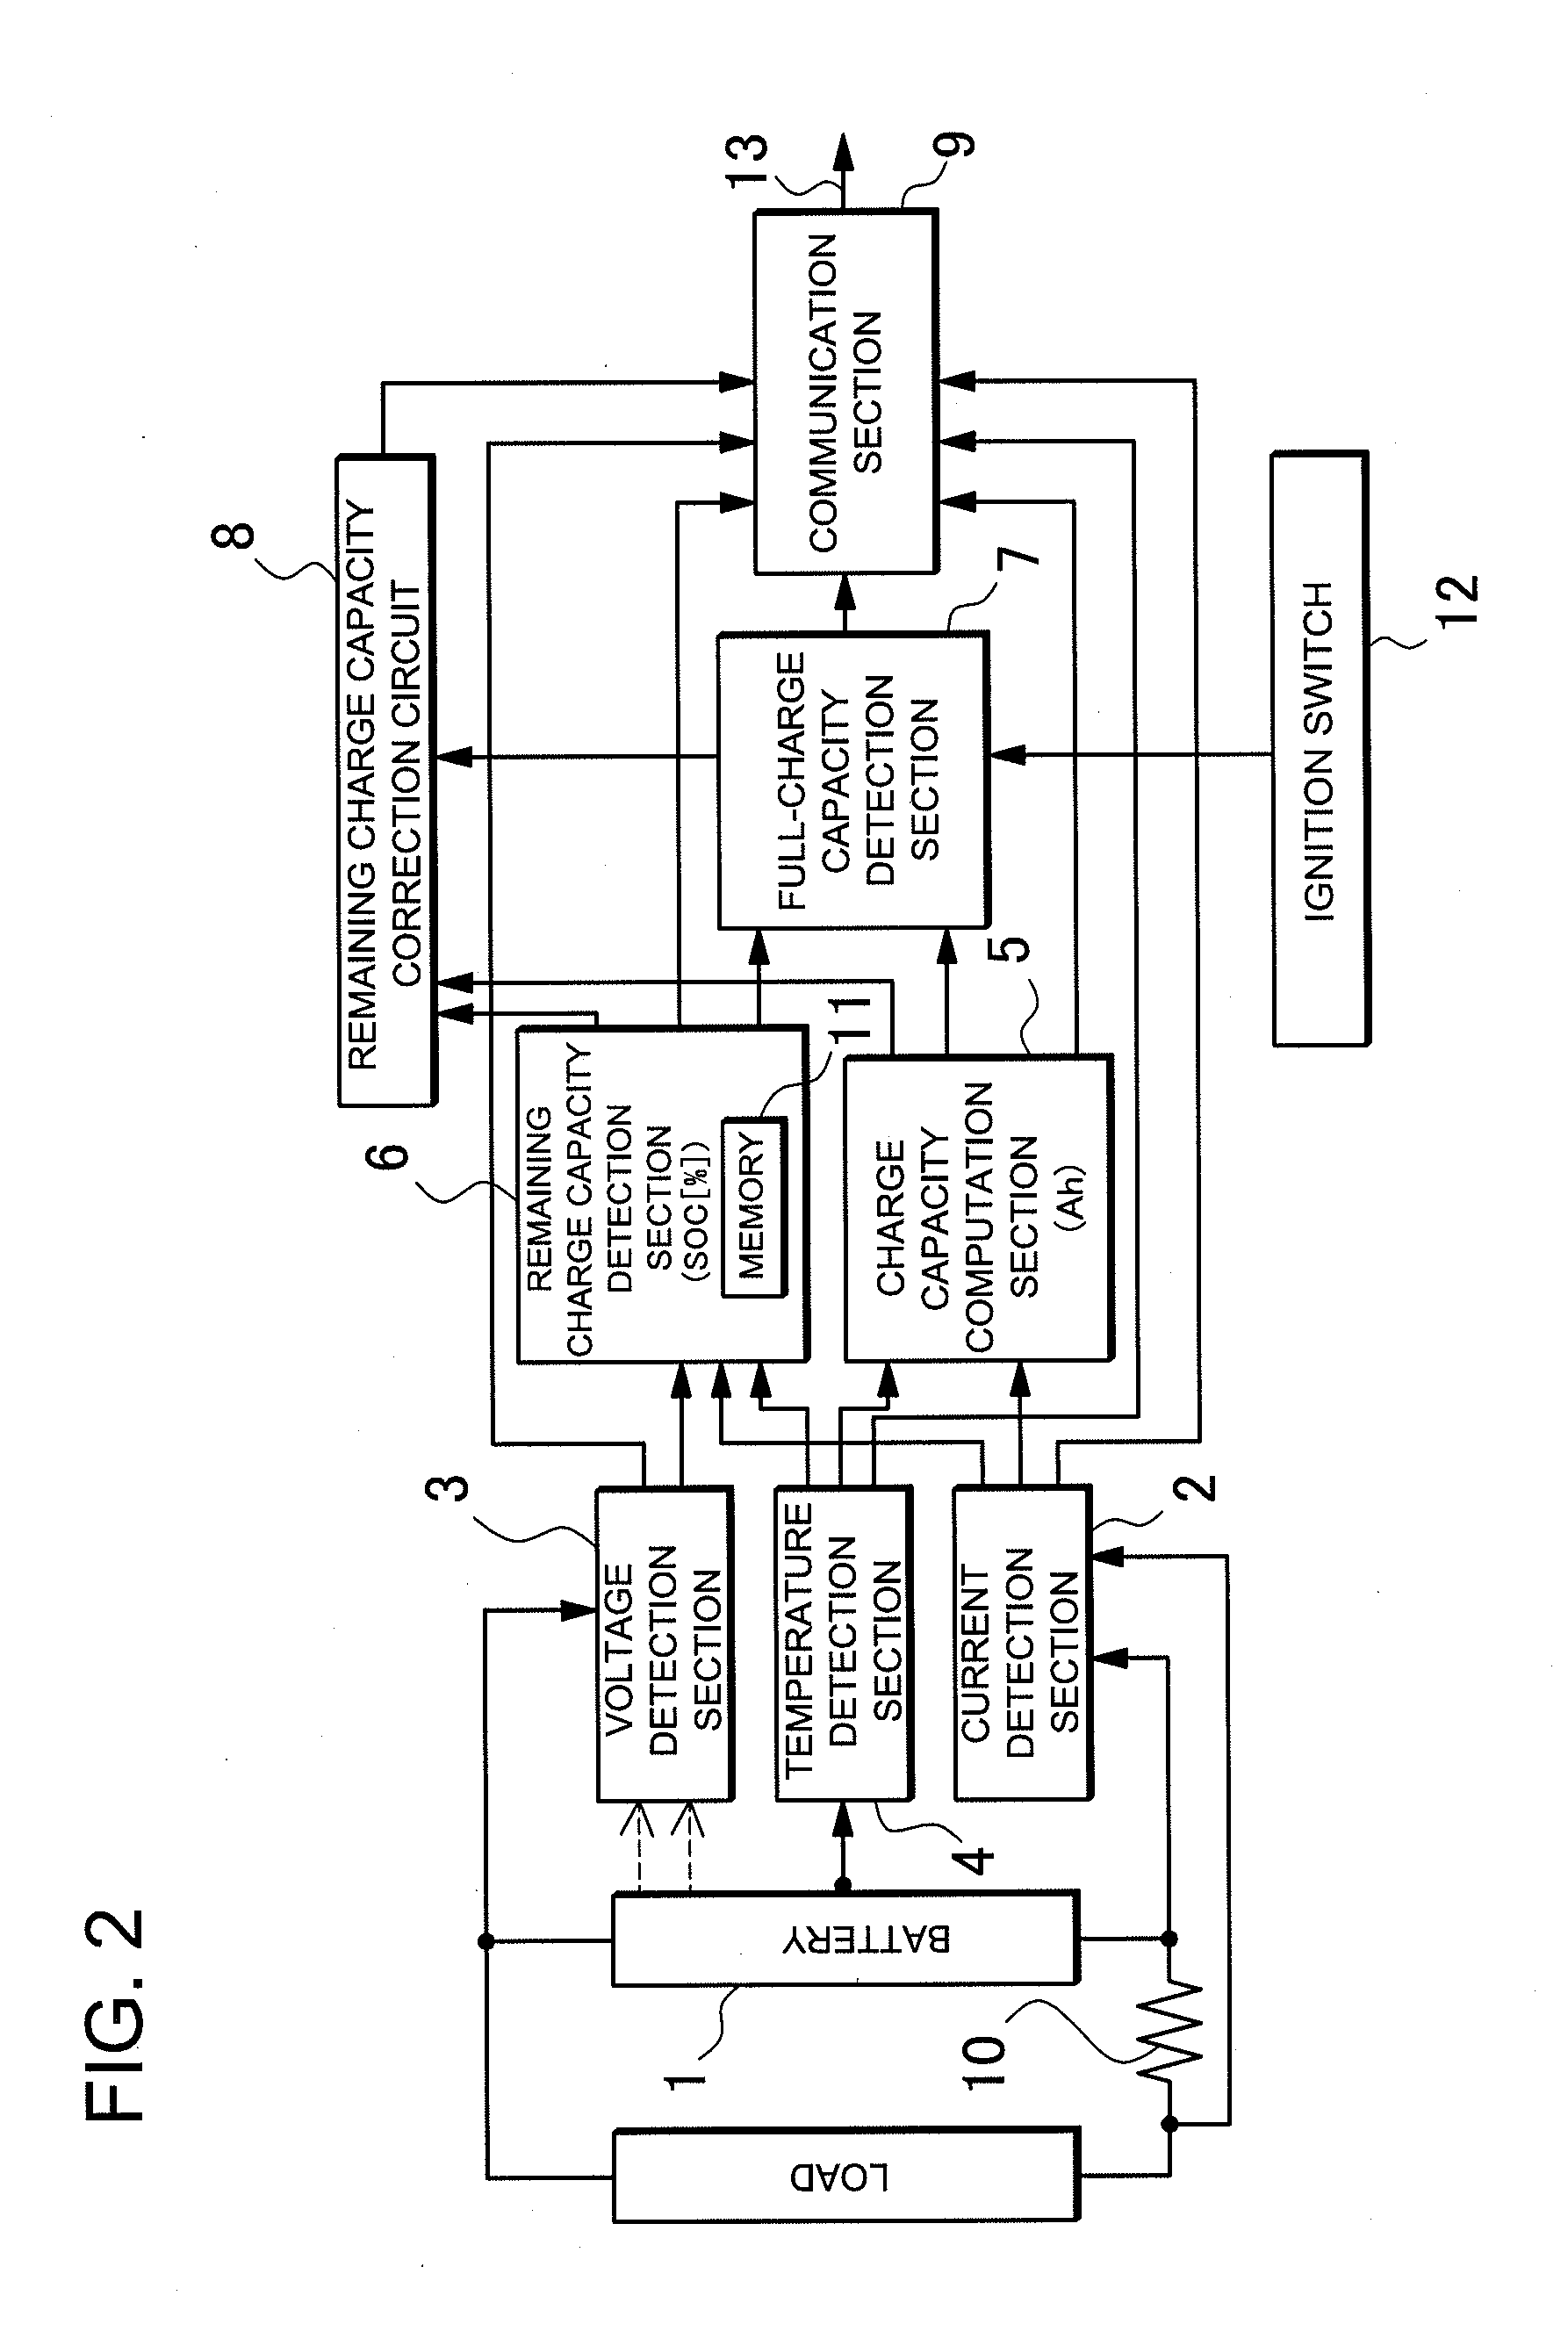 Method of detecting battery full-charge capacity